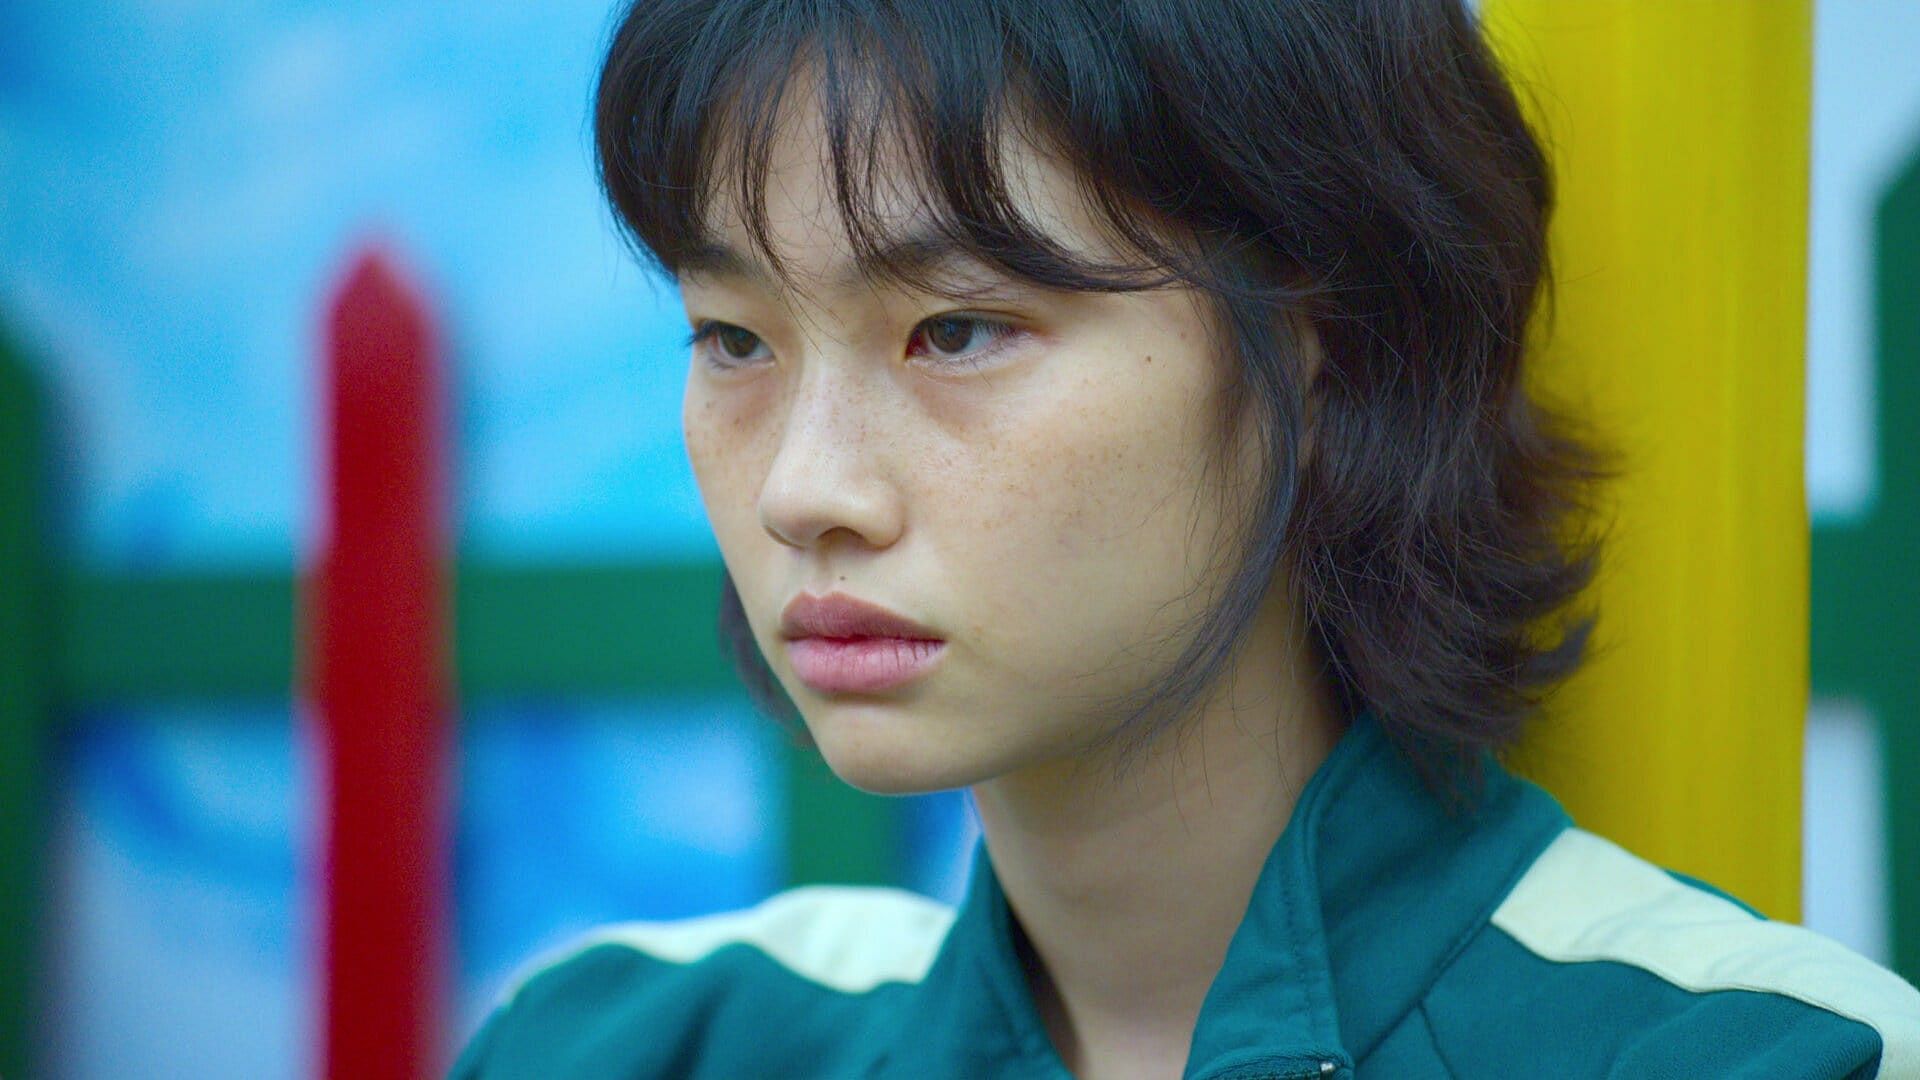 There is still hope for Jung Ho-yeon&#039;s return in Squid Game Season 2 (Image via Netflix)